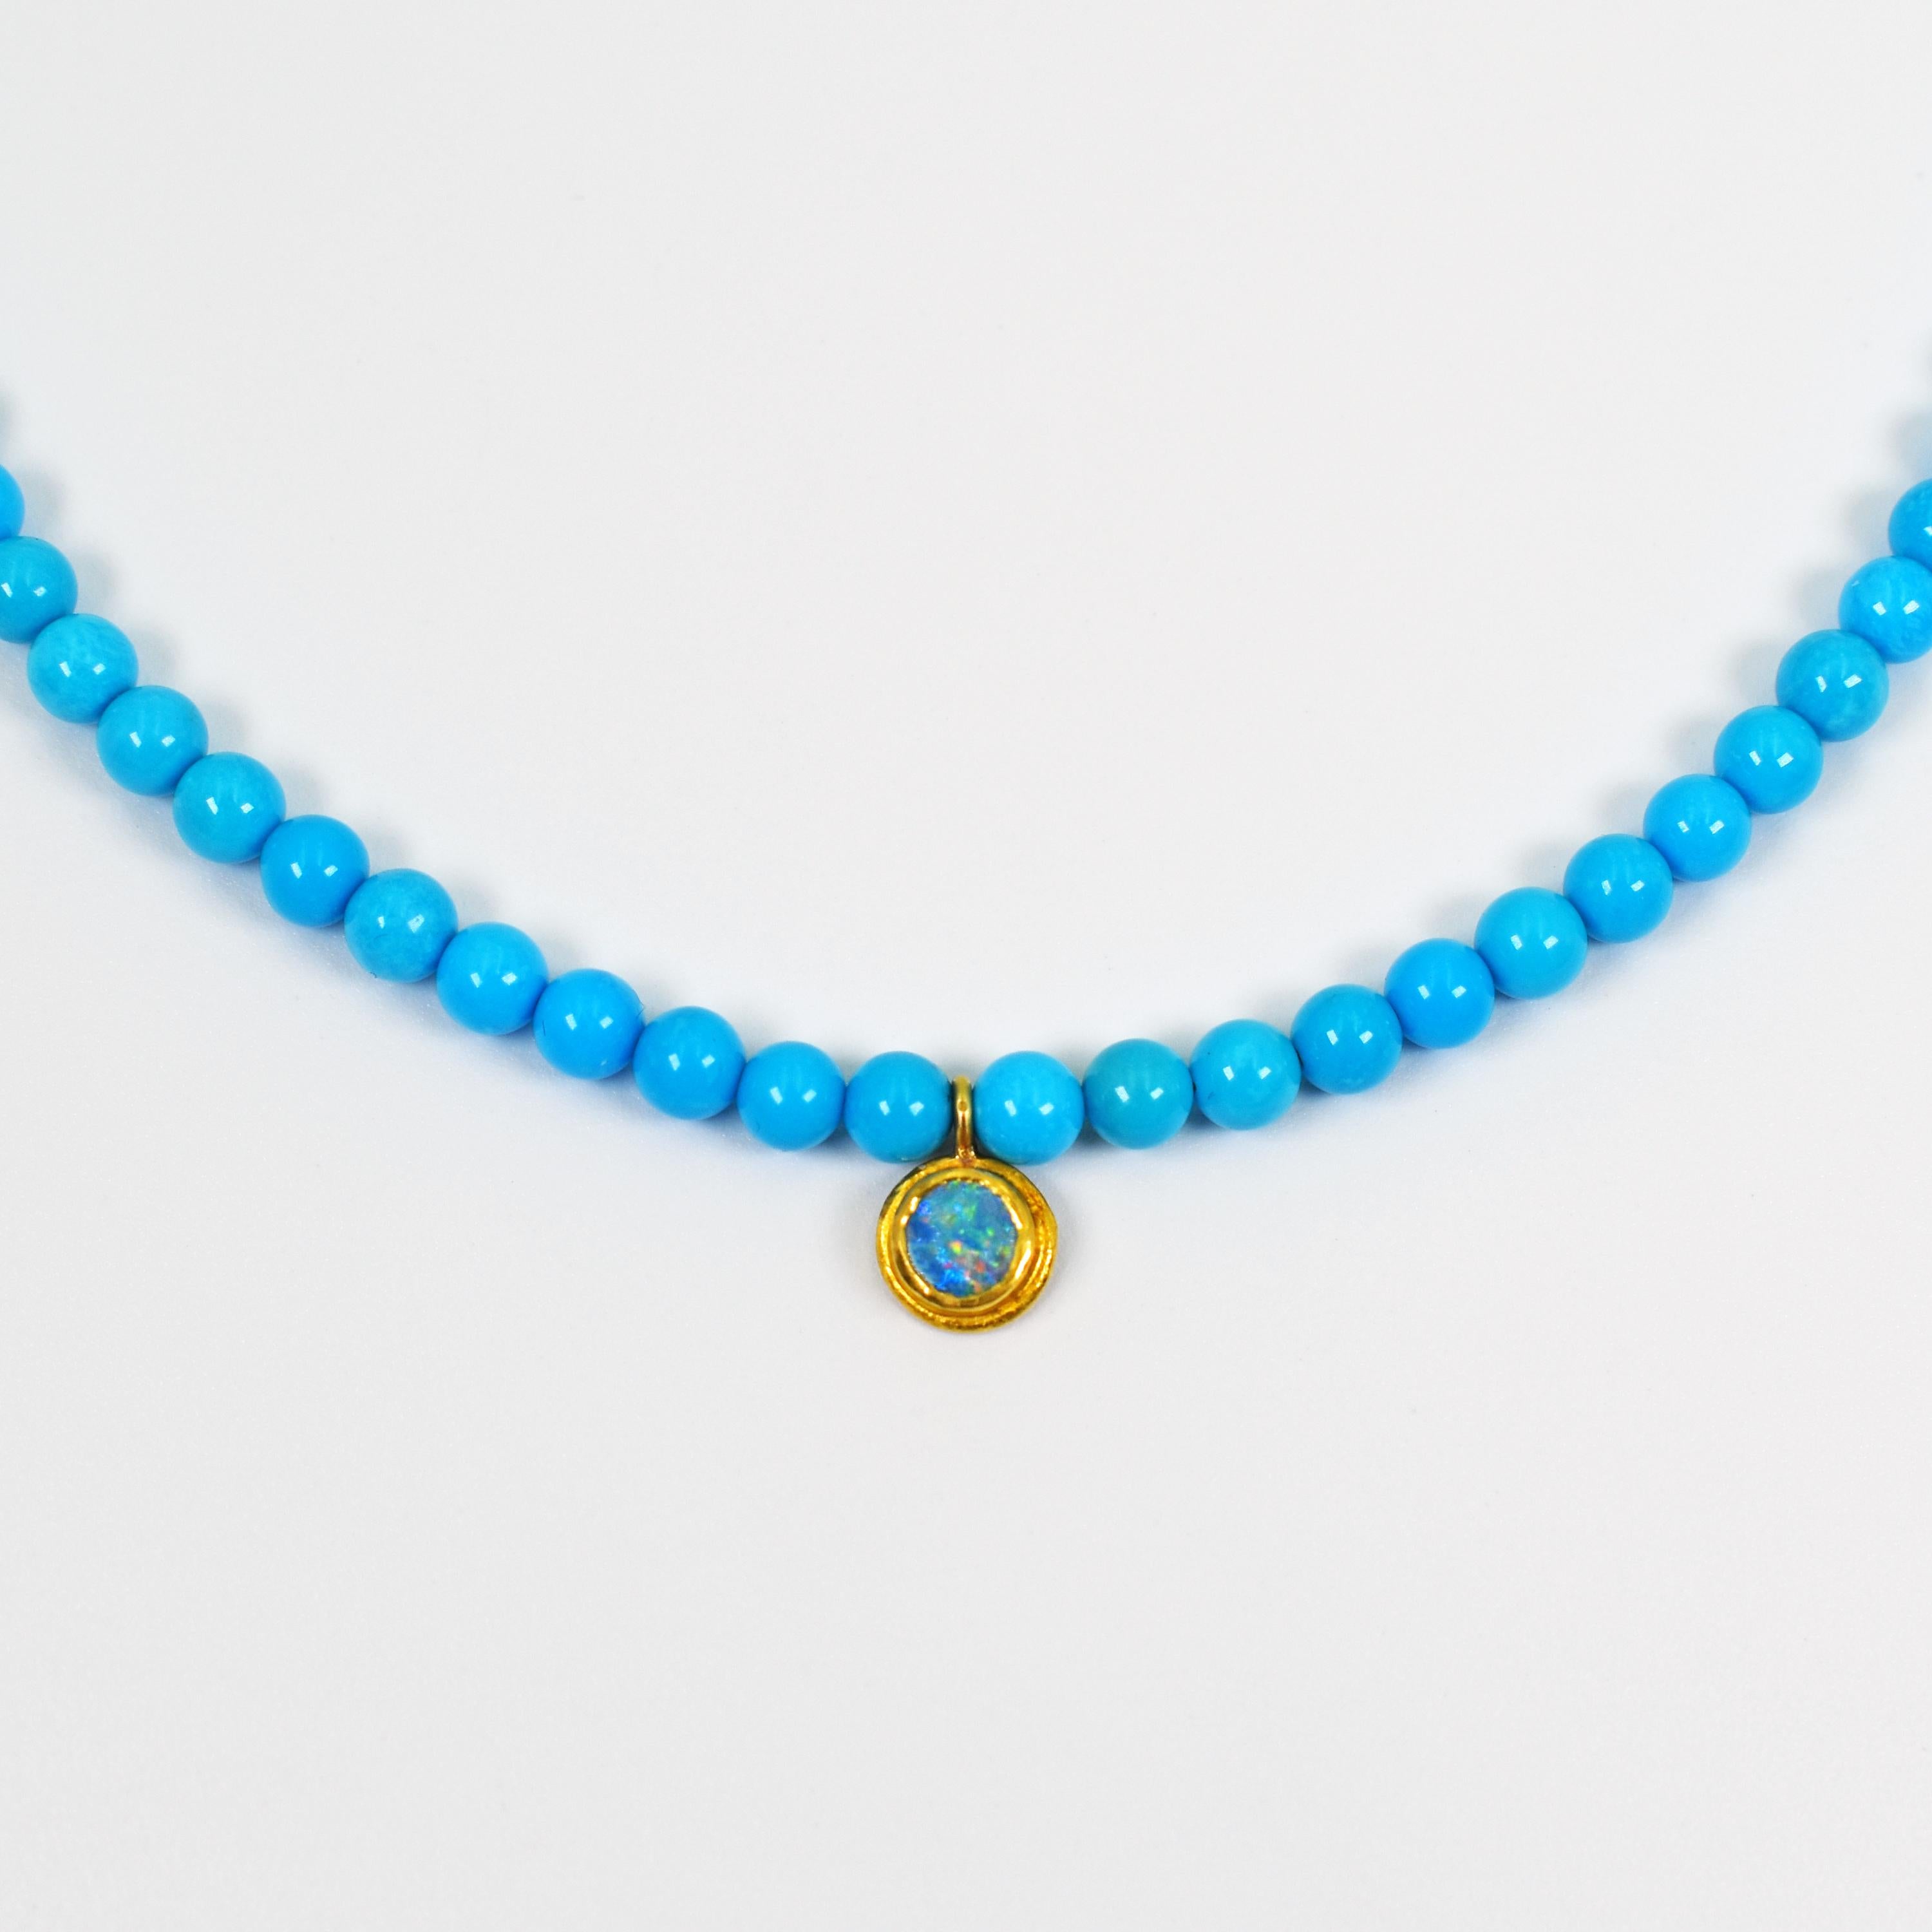 Blue Opal and 22k yellow gold charm pendant on a coveted pure blue Sleeping Beauty Turquoise beaded necklace. Beaded necklace is 16 inches in length, and is finished with a 22k gold hook closure.